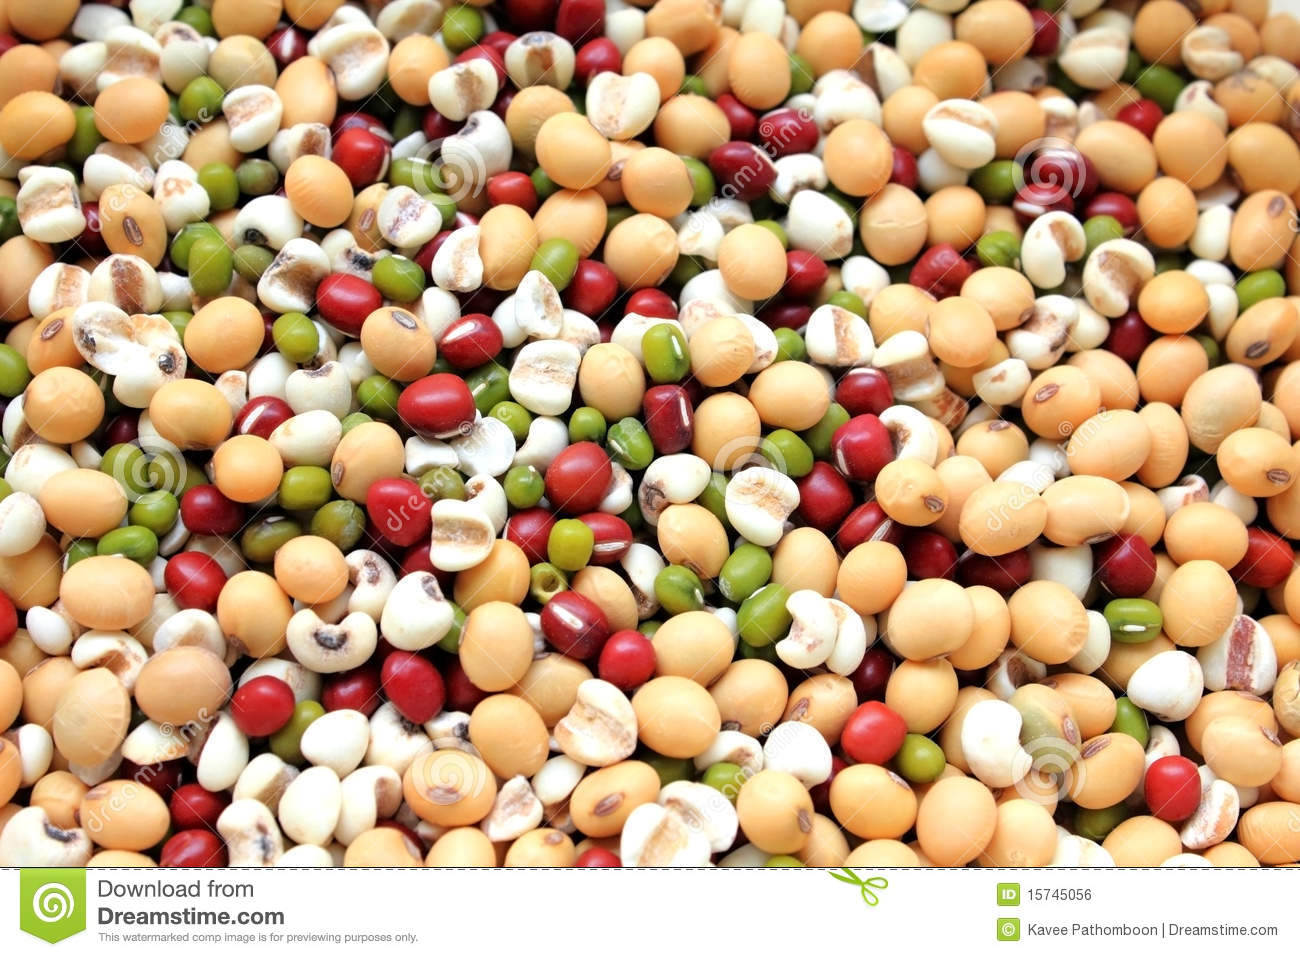 Mixed Dry Beans Royalty Free Stock Image   Image  15745056